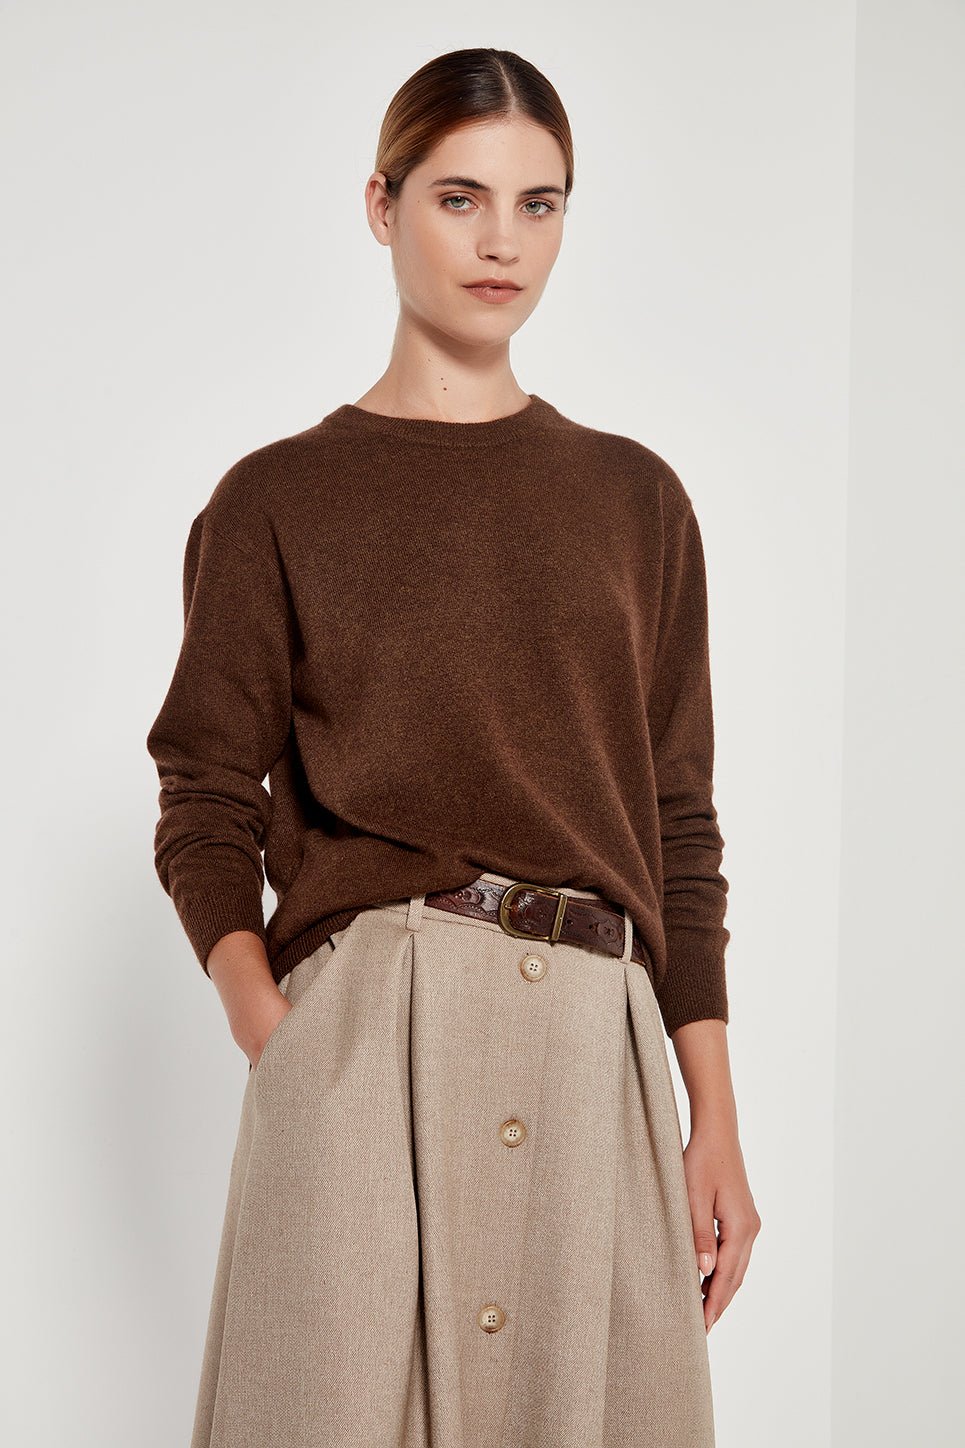 The Cashmere Crew in Chocolate Melange